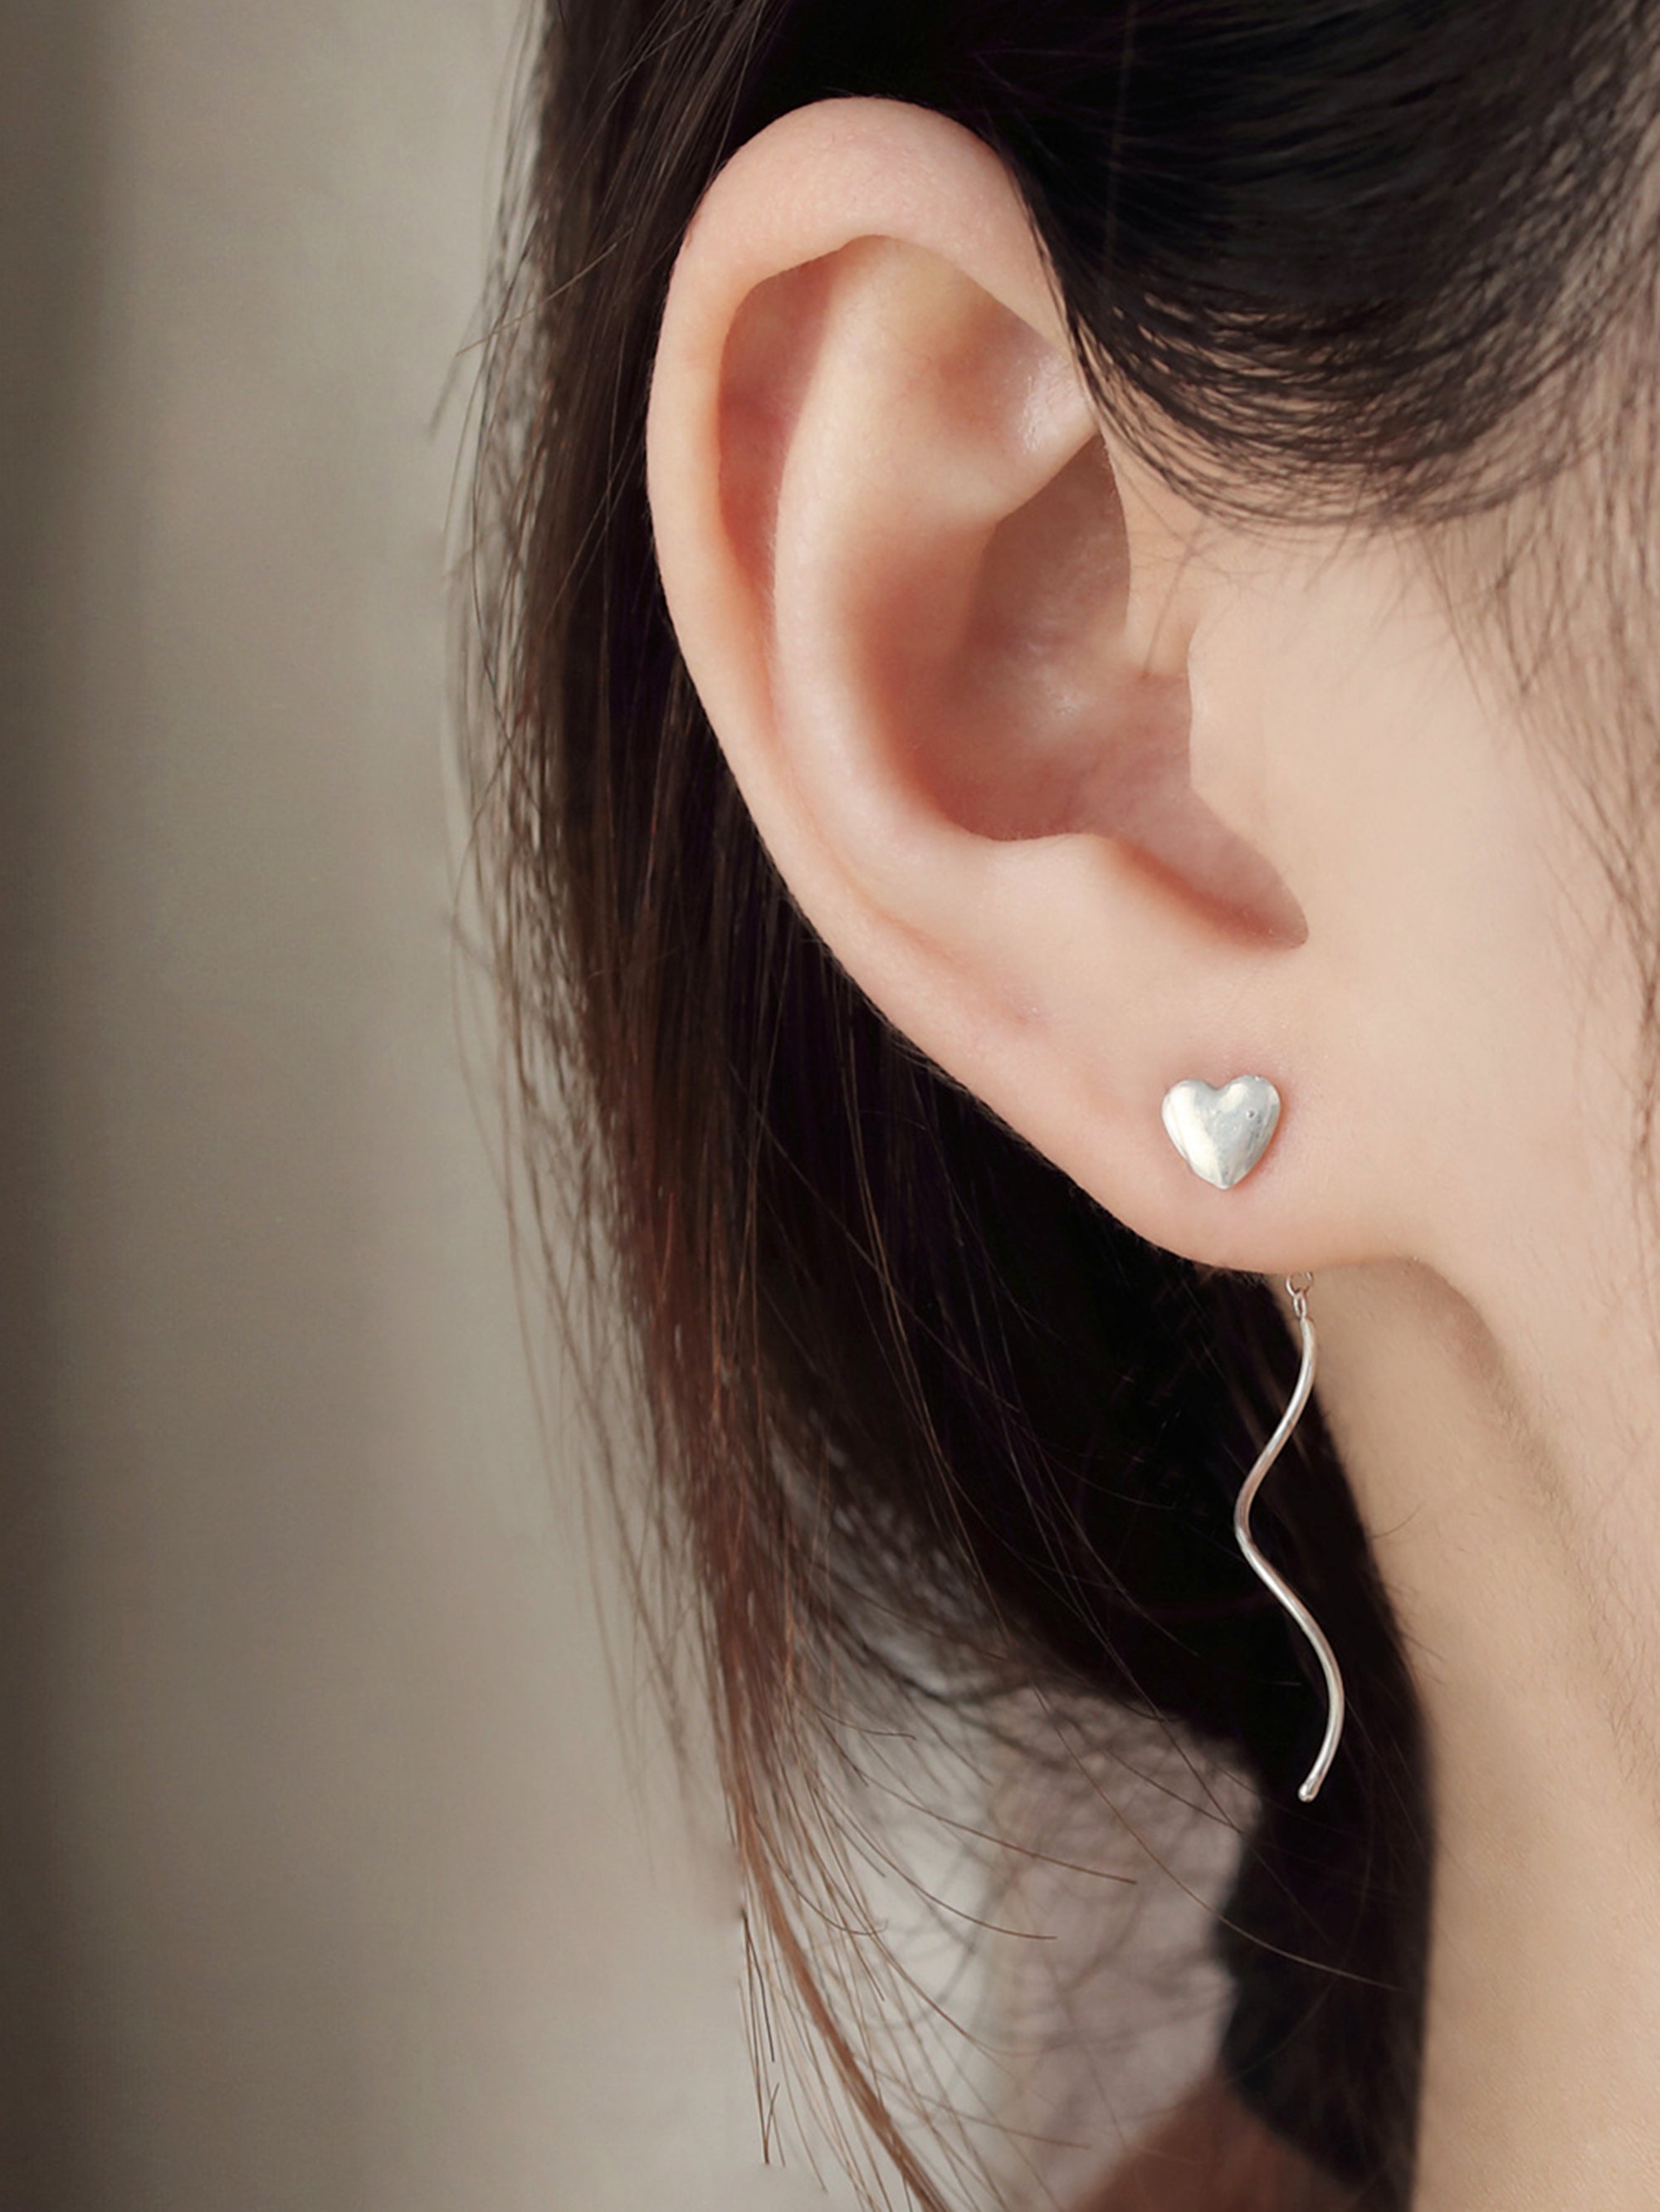 One Earring // Six Ways : How to Style Our Ear Threaders – Midsummer Star